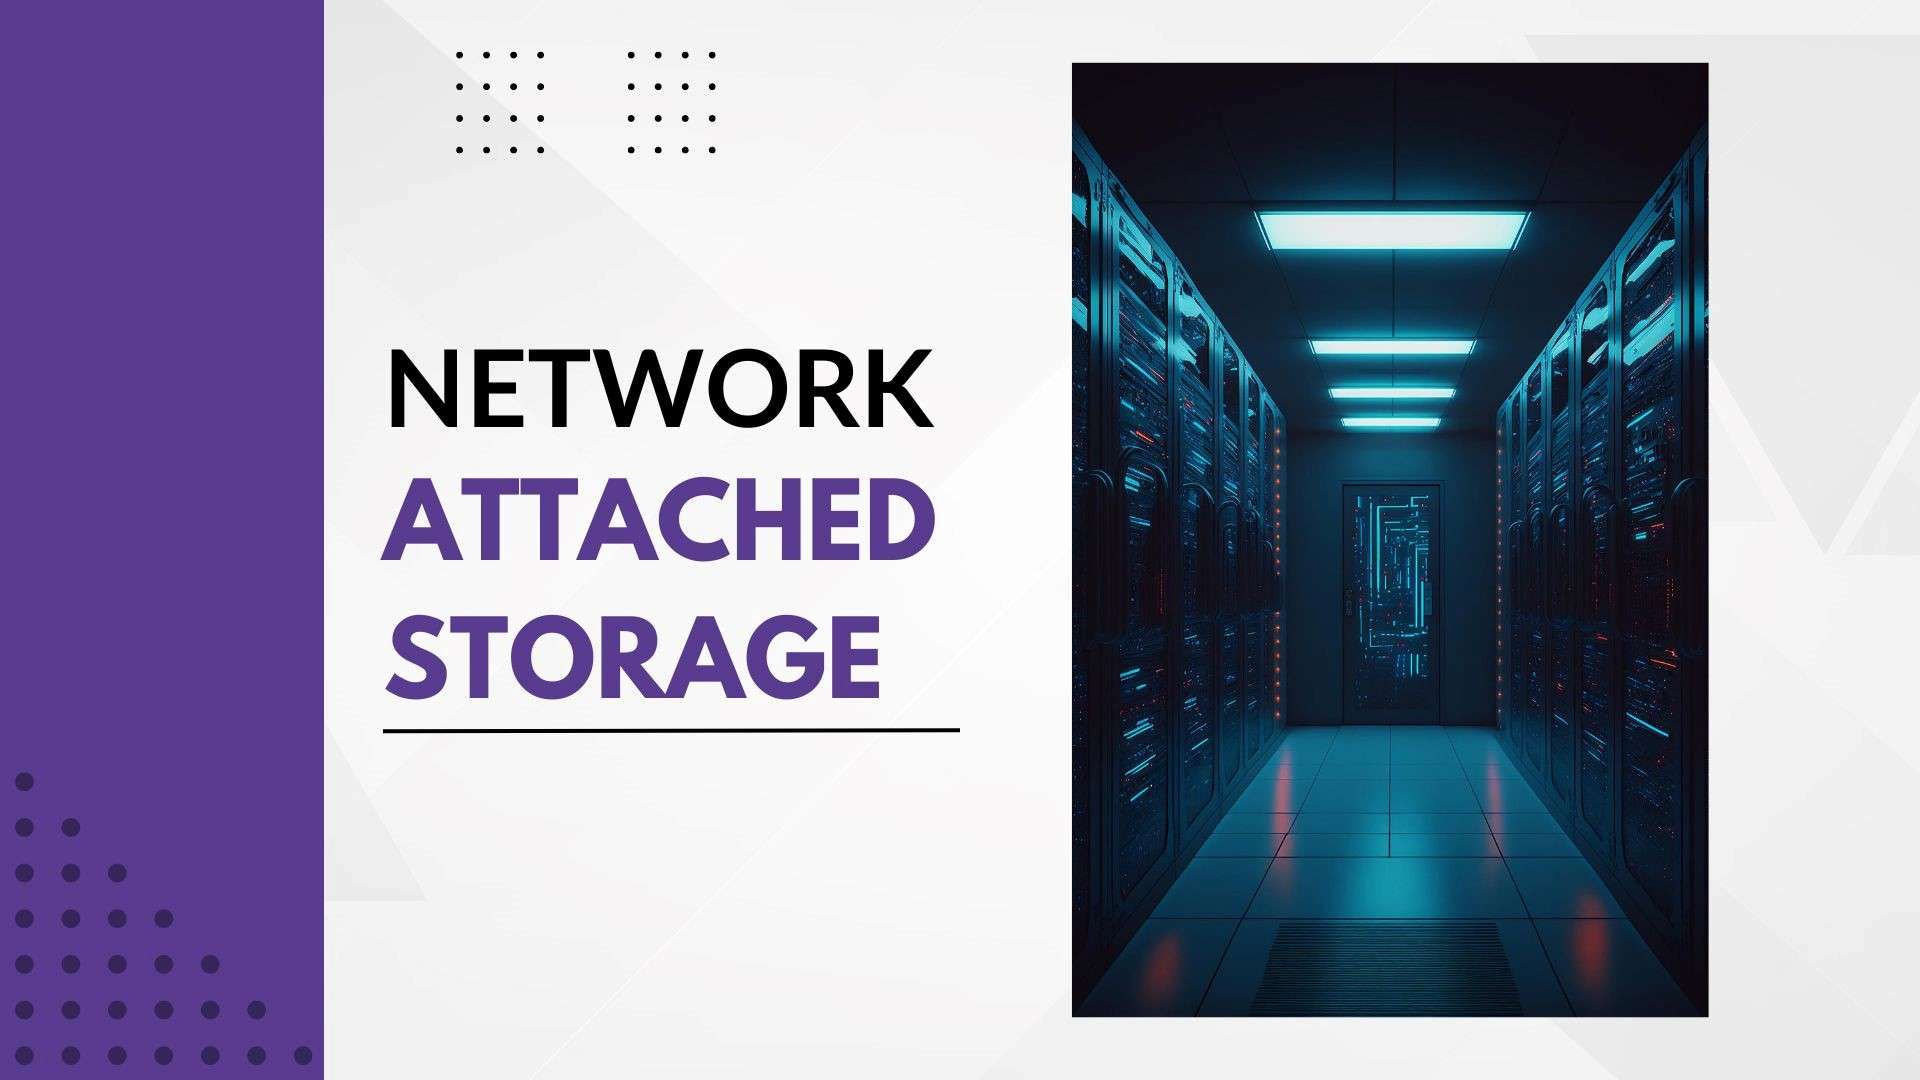 Introduce the concept of Network Attached Storage (NAS) and highlight its benefits